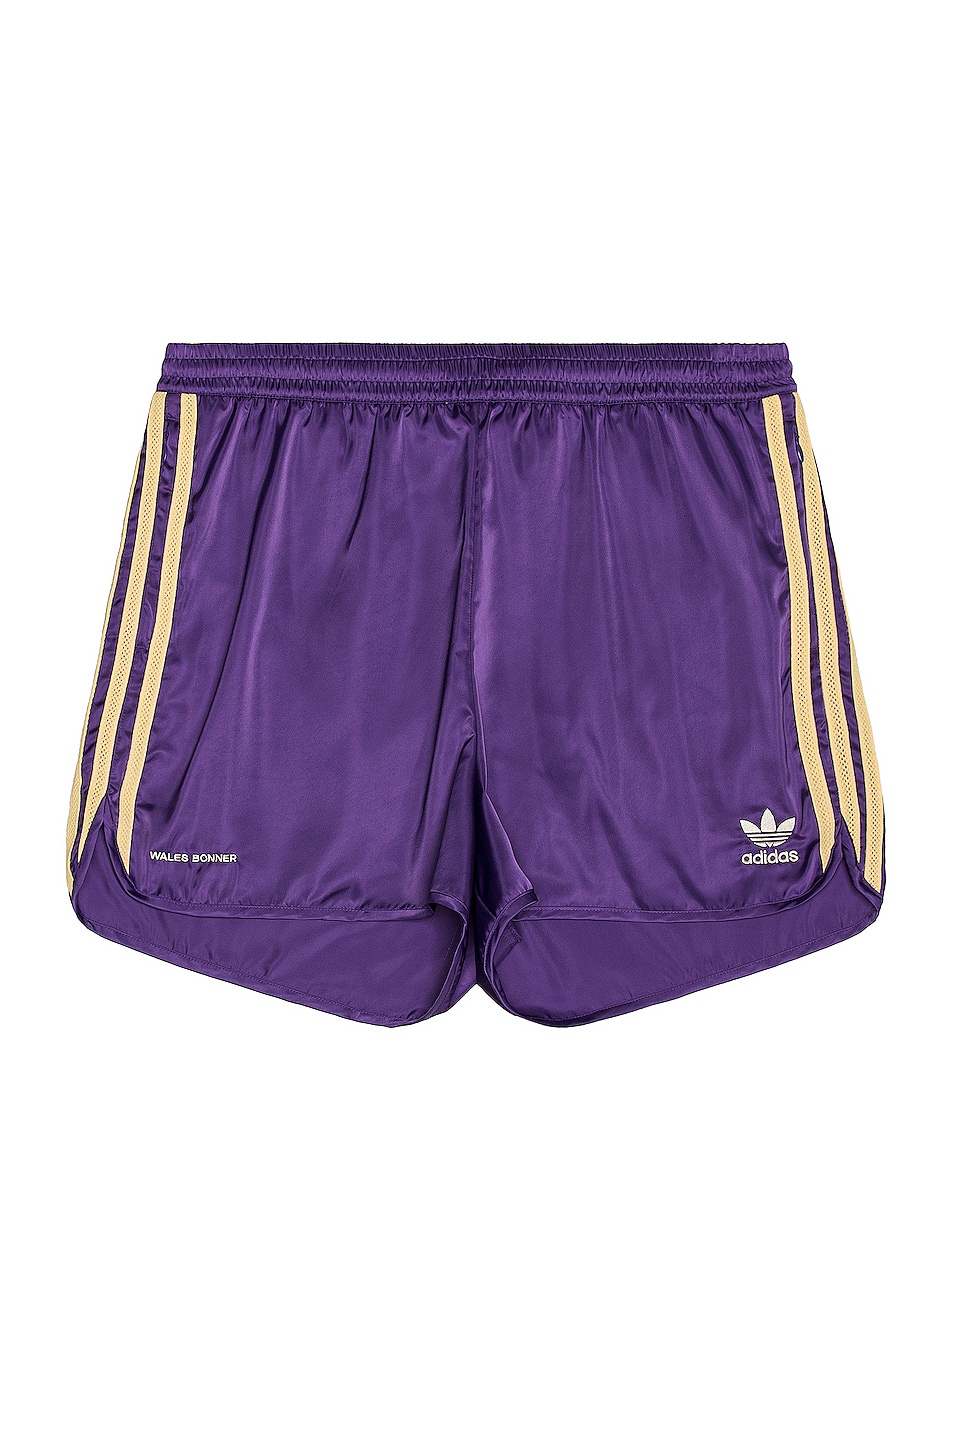 Image 1 of adidas by Wales Bonner 70s Shorts in Unity Purple & Glaze